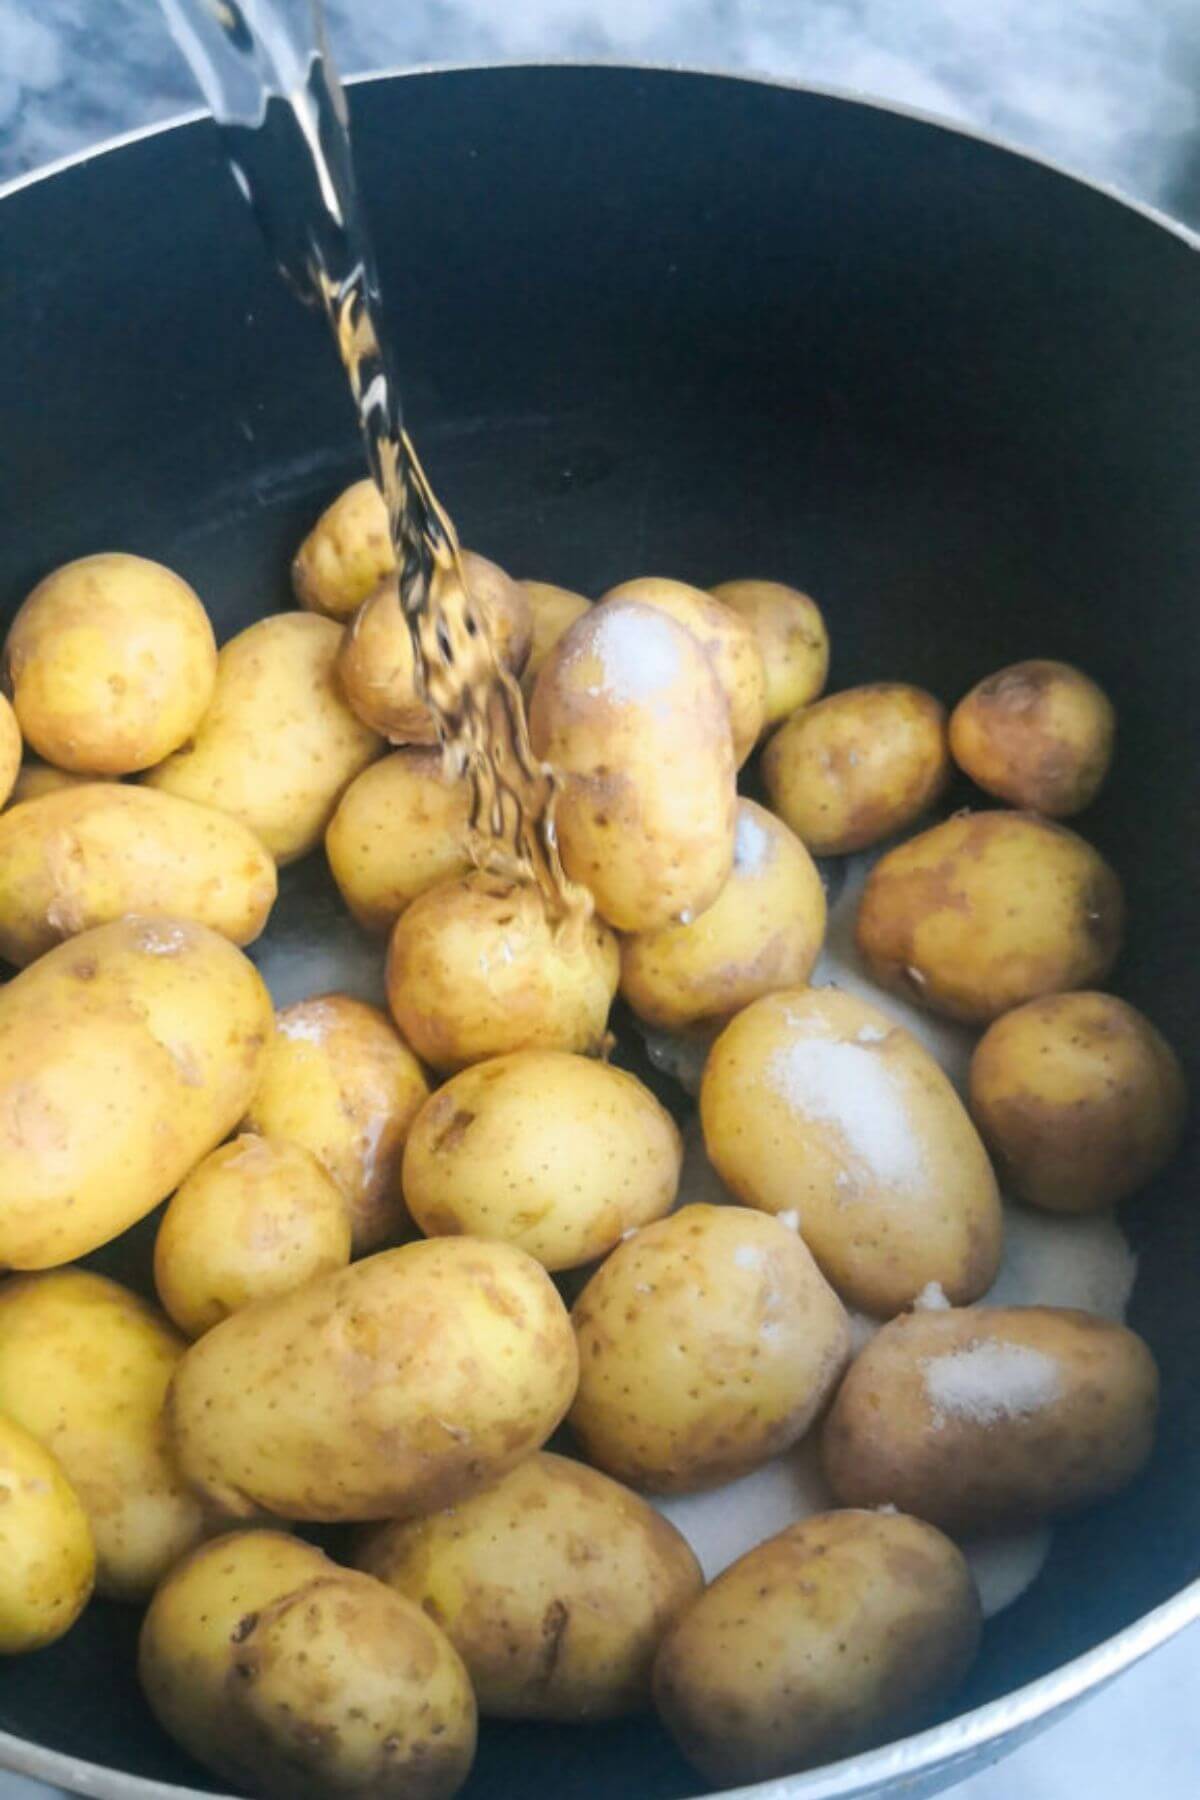 Water being poured into a large black pot filled with baby potatoes.